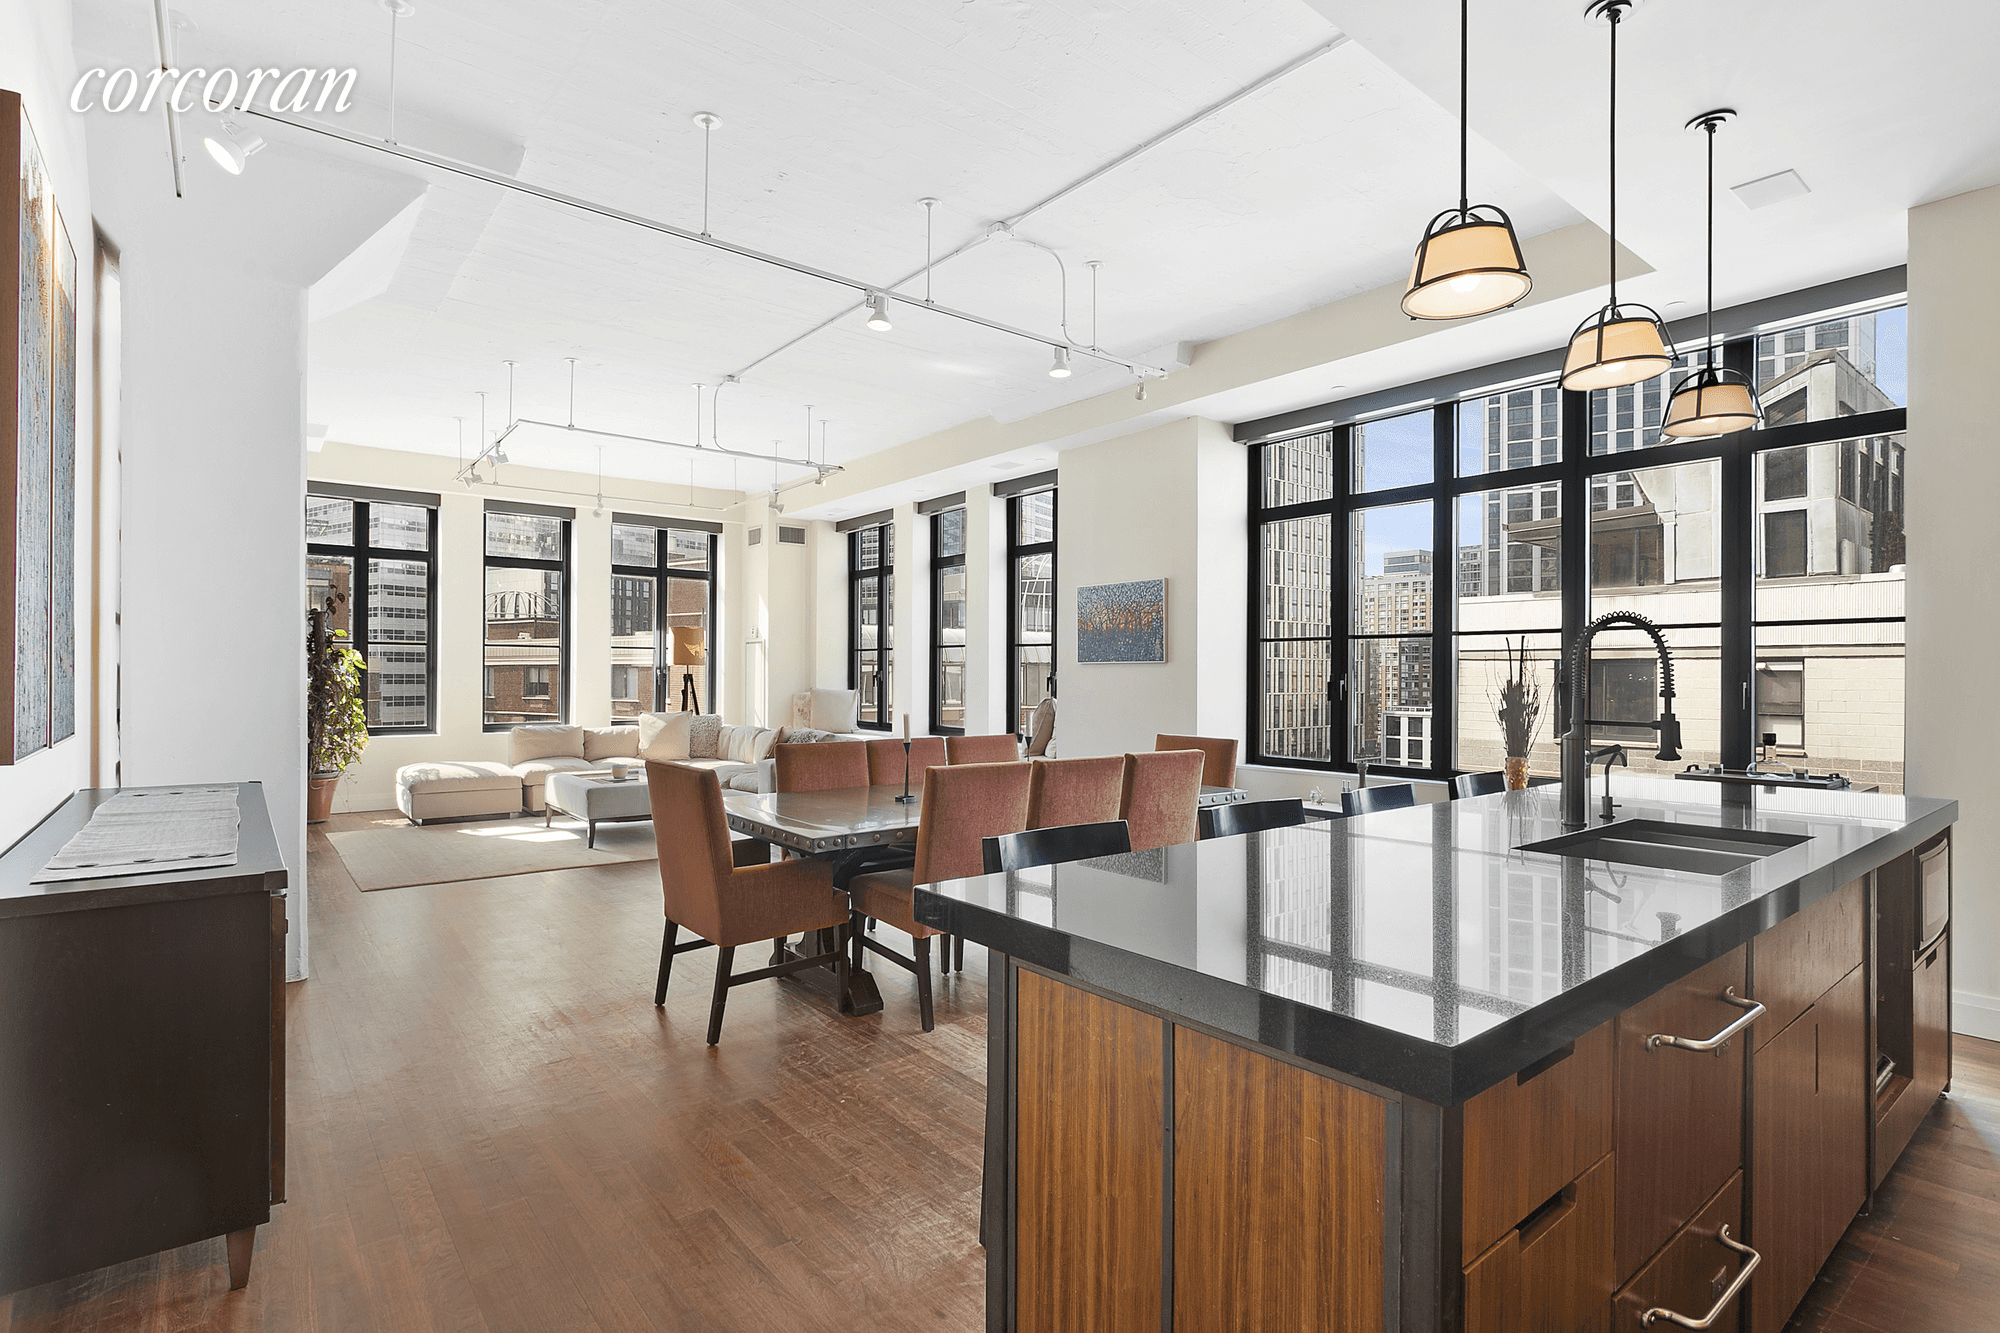 Enjoy endless sunlight and views in this sprawling corner loft featuring 29 windows on four exposures plus a private balcony, a loft rarity, in an outstanding modern Tribeca condominium conversion.